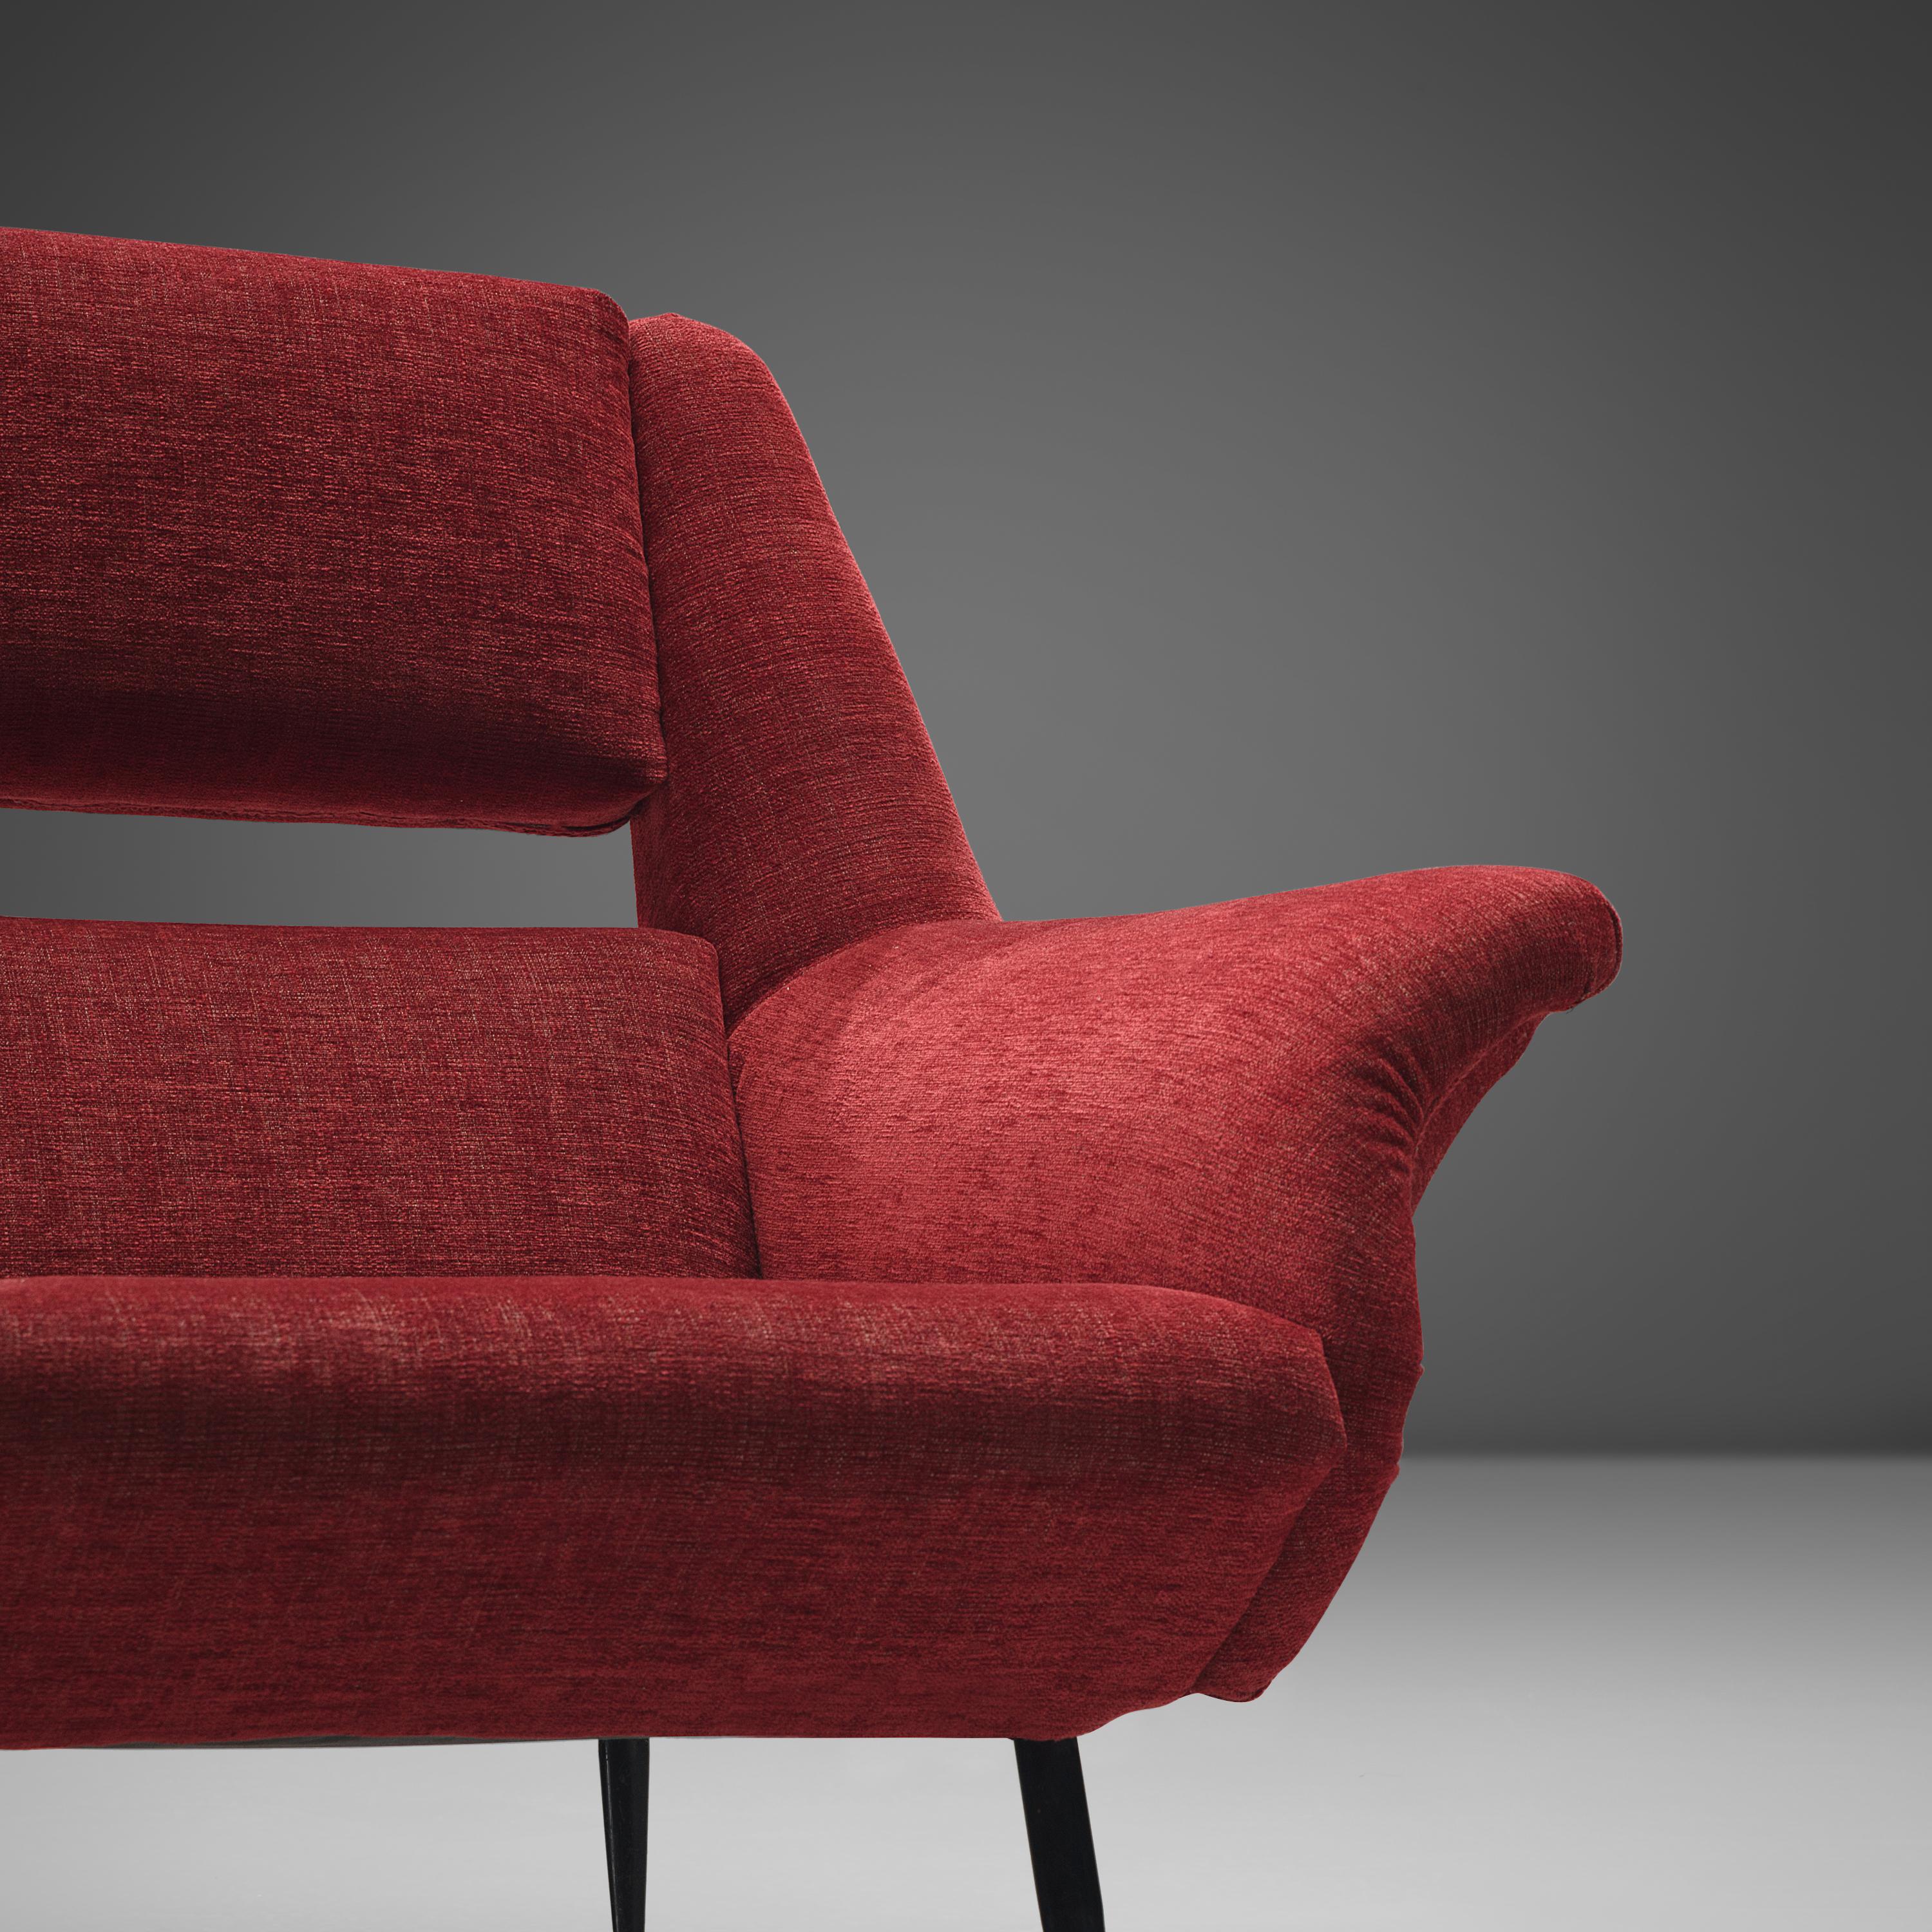 Mid-20th Century Elegant Italian Lounge Chairs in Red Upholstery